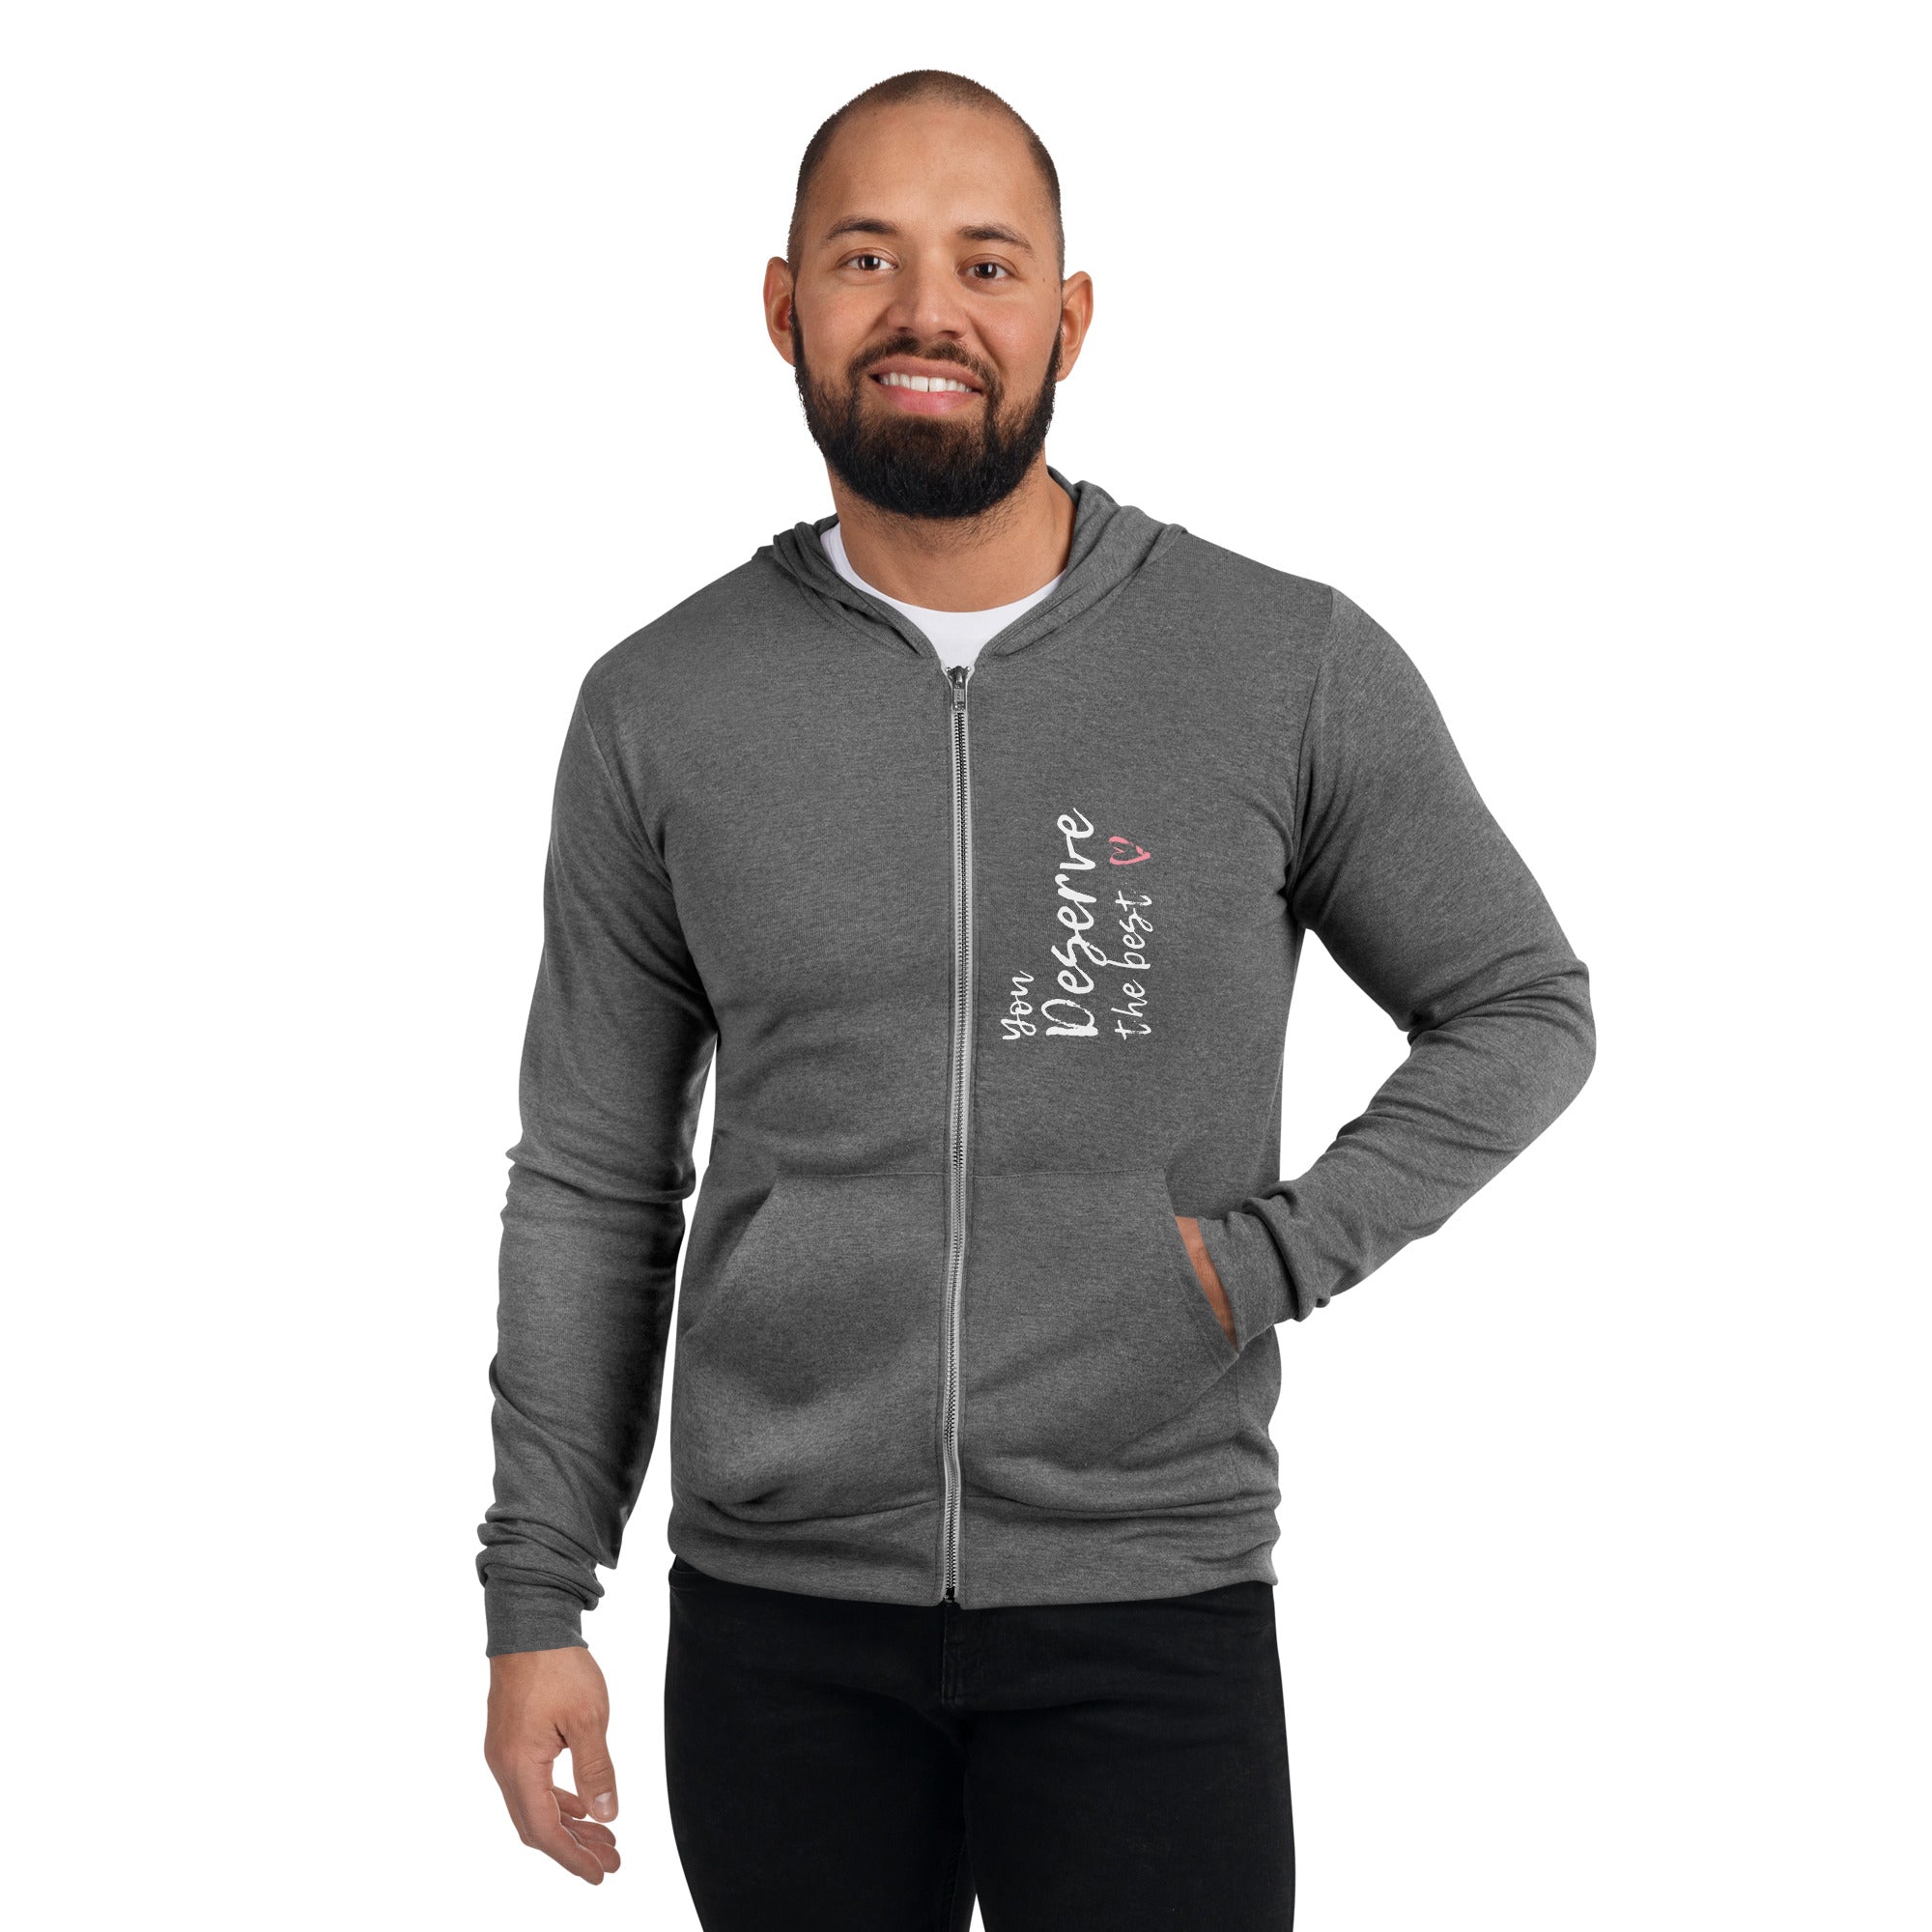 You Deserve The Best, Unisex zip hoodie | Positive Affirmation Clothing